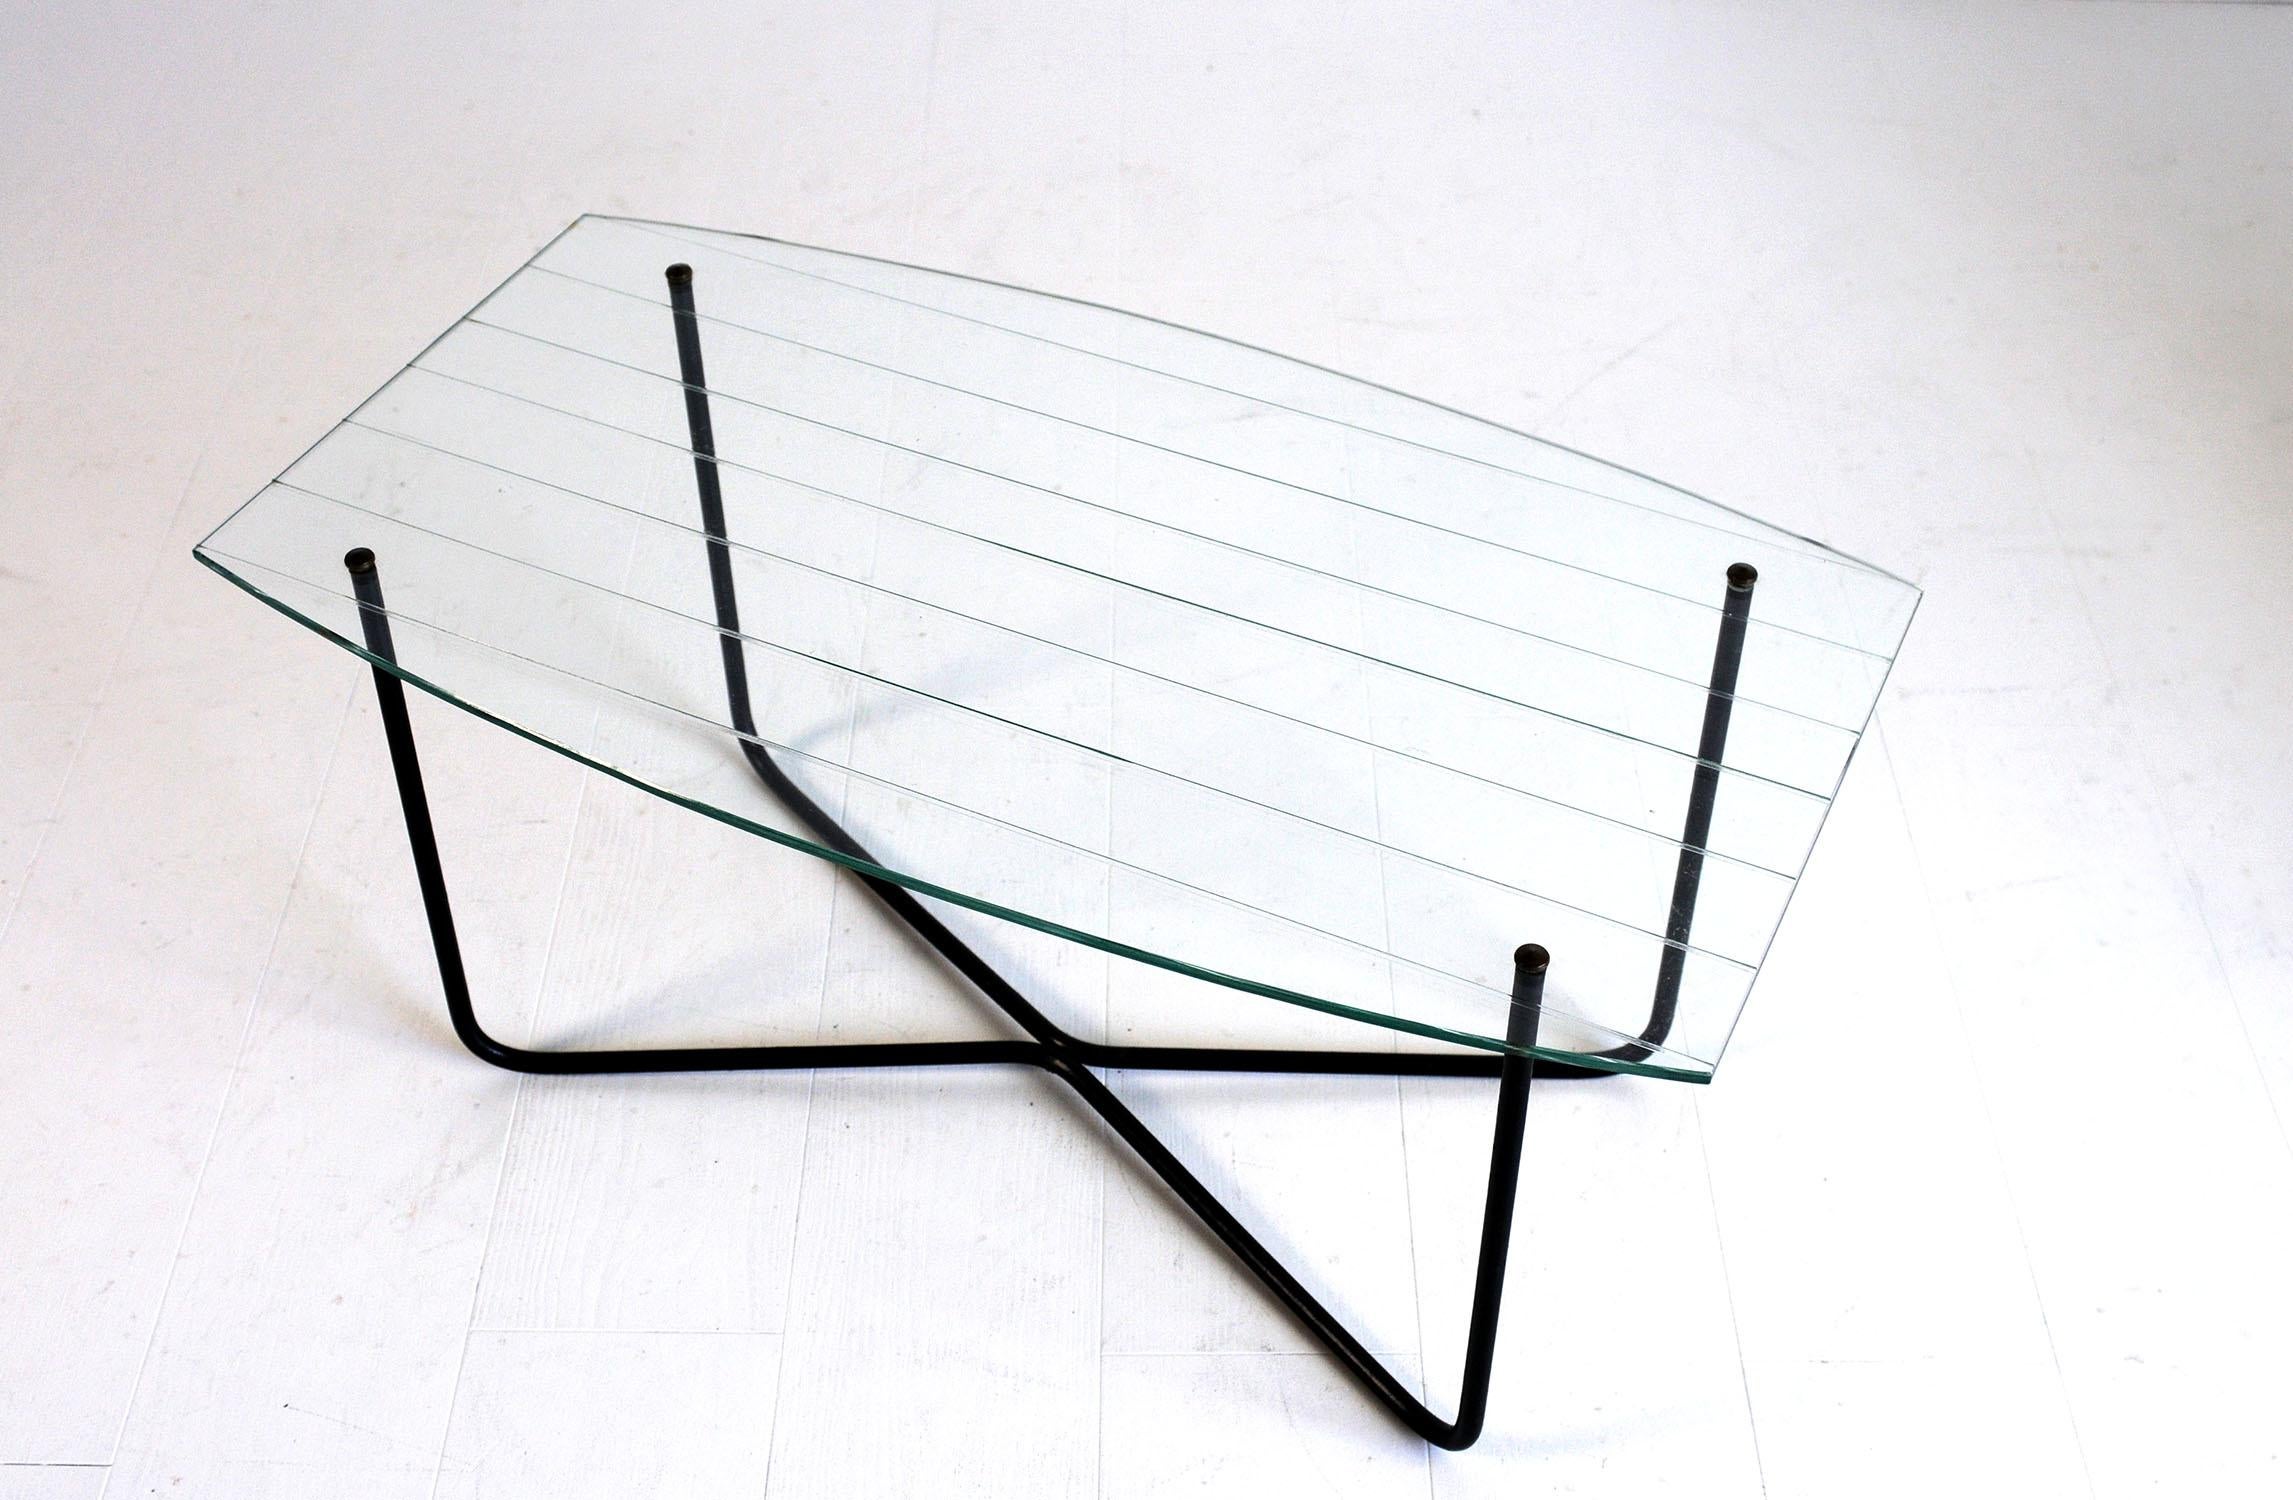 Jacques Hitier, Minimalist coffee table number 36 in black lacquered tubular metal and glass, France 1955. The X-shaped base is assembled in the center, four blind screws in patinated brass secure the top. The grooved transparent glass slab is in